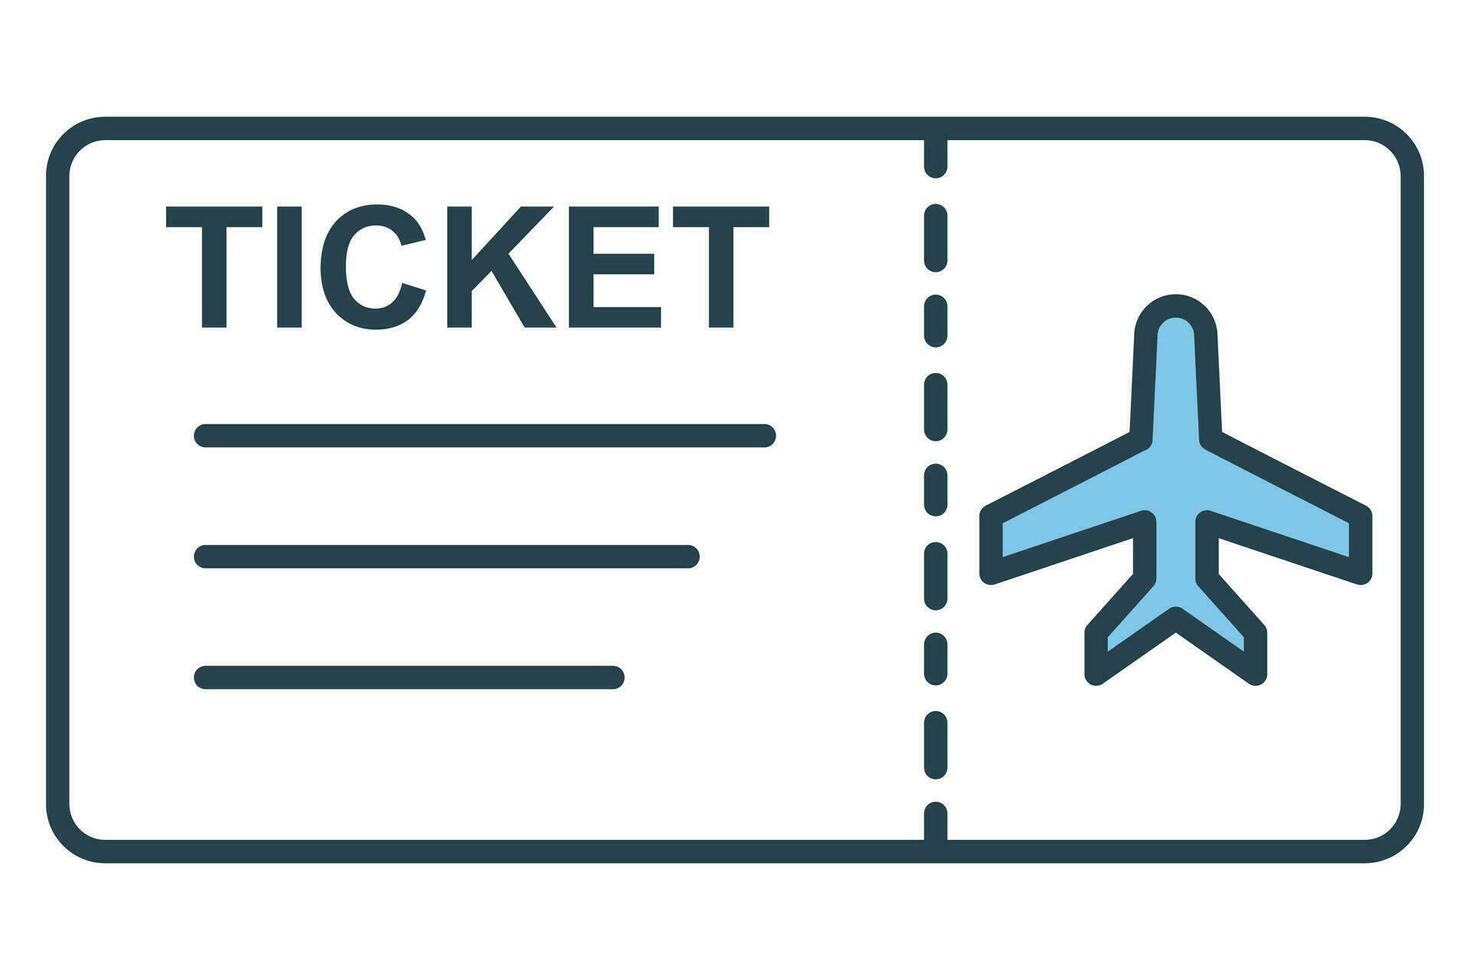 airplane ticket icon. icon related to ticket for air travel. flat line icon style. element illustration vector